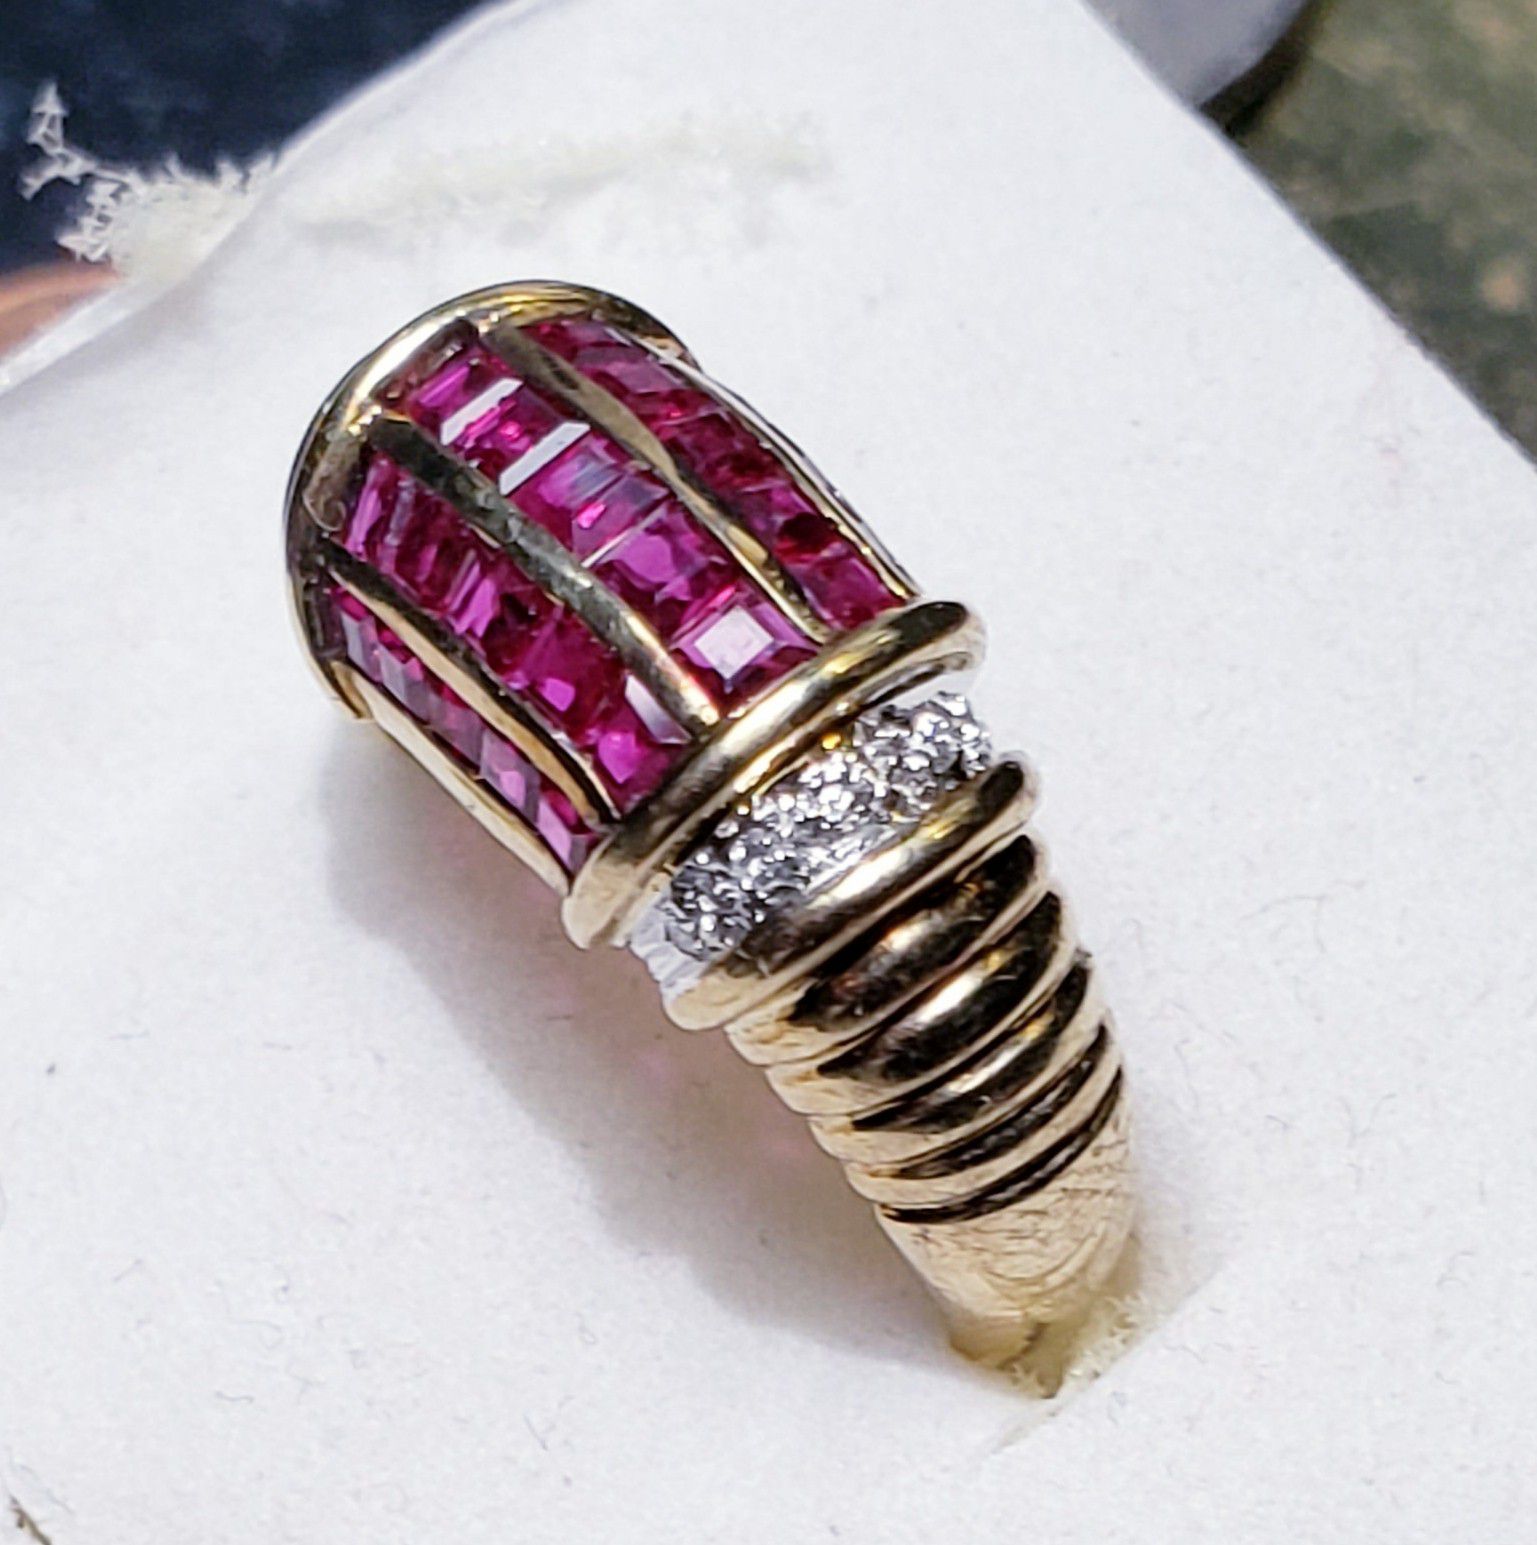 BEAUTIFUL RUBY AND DIAMOND 14KT GOLD RING "NICE"